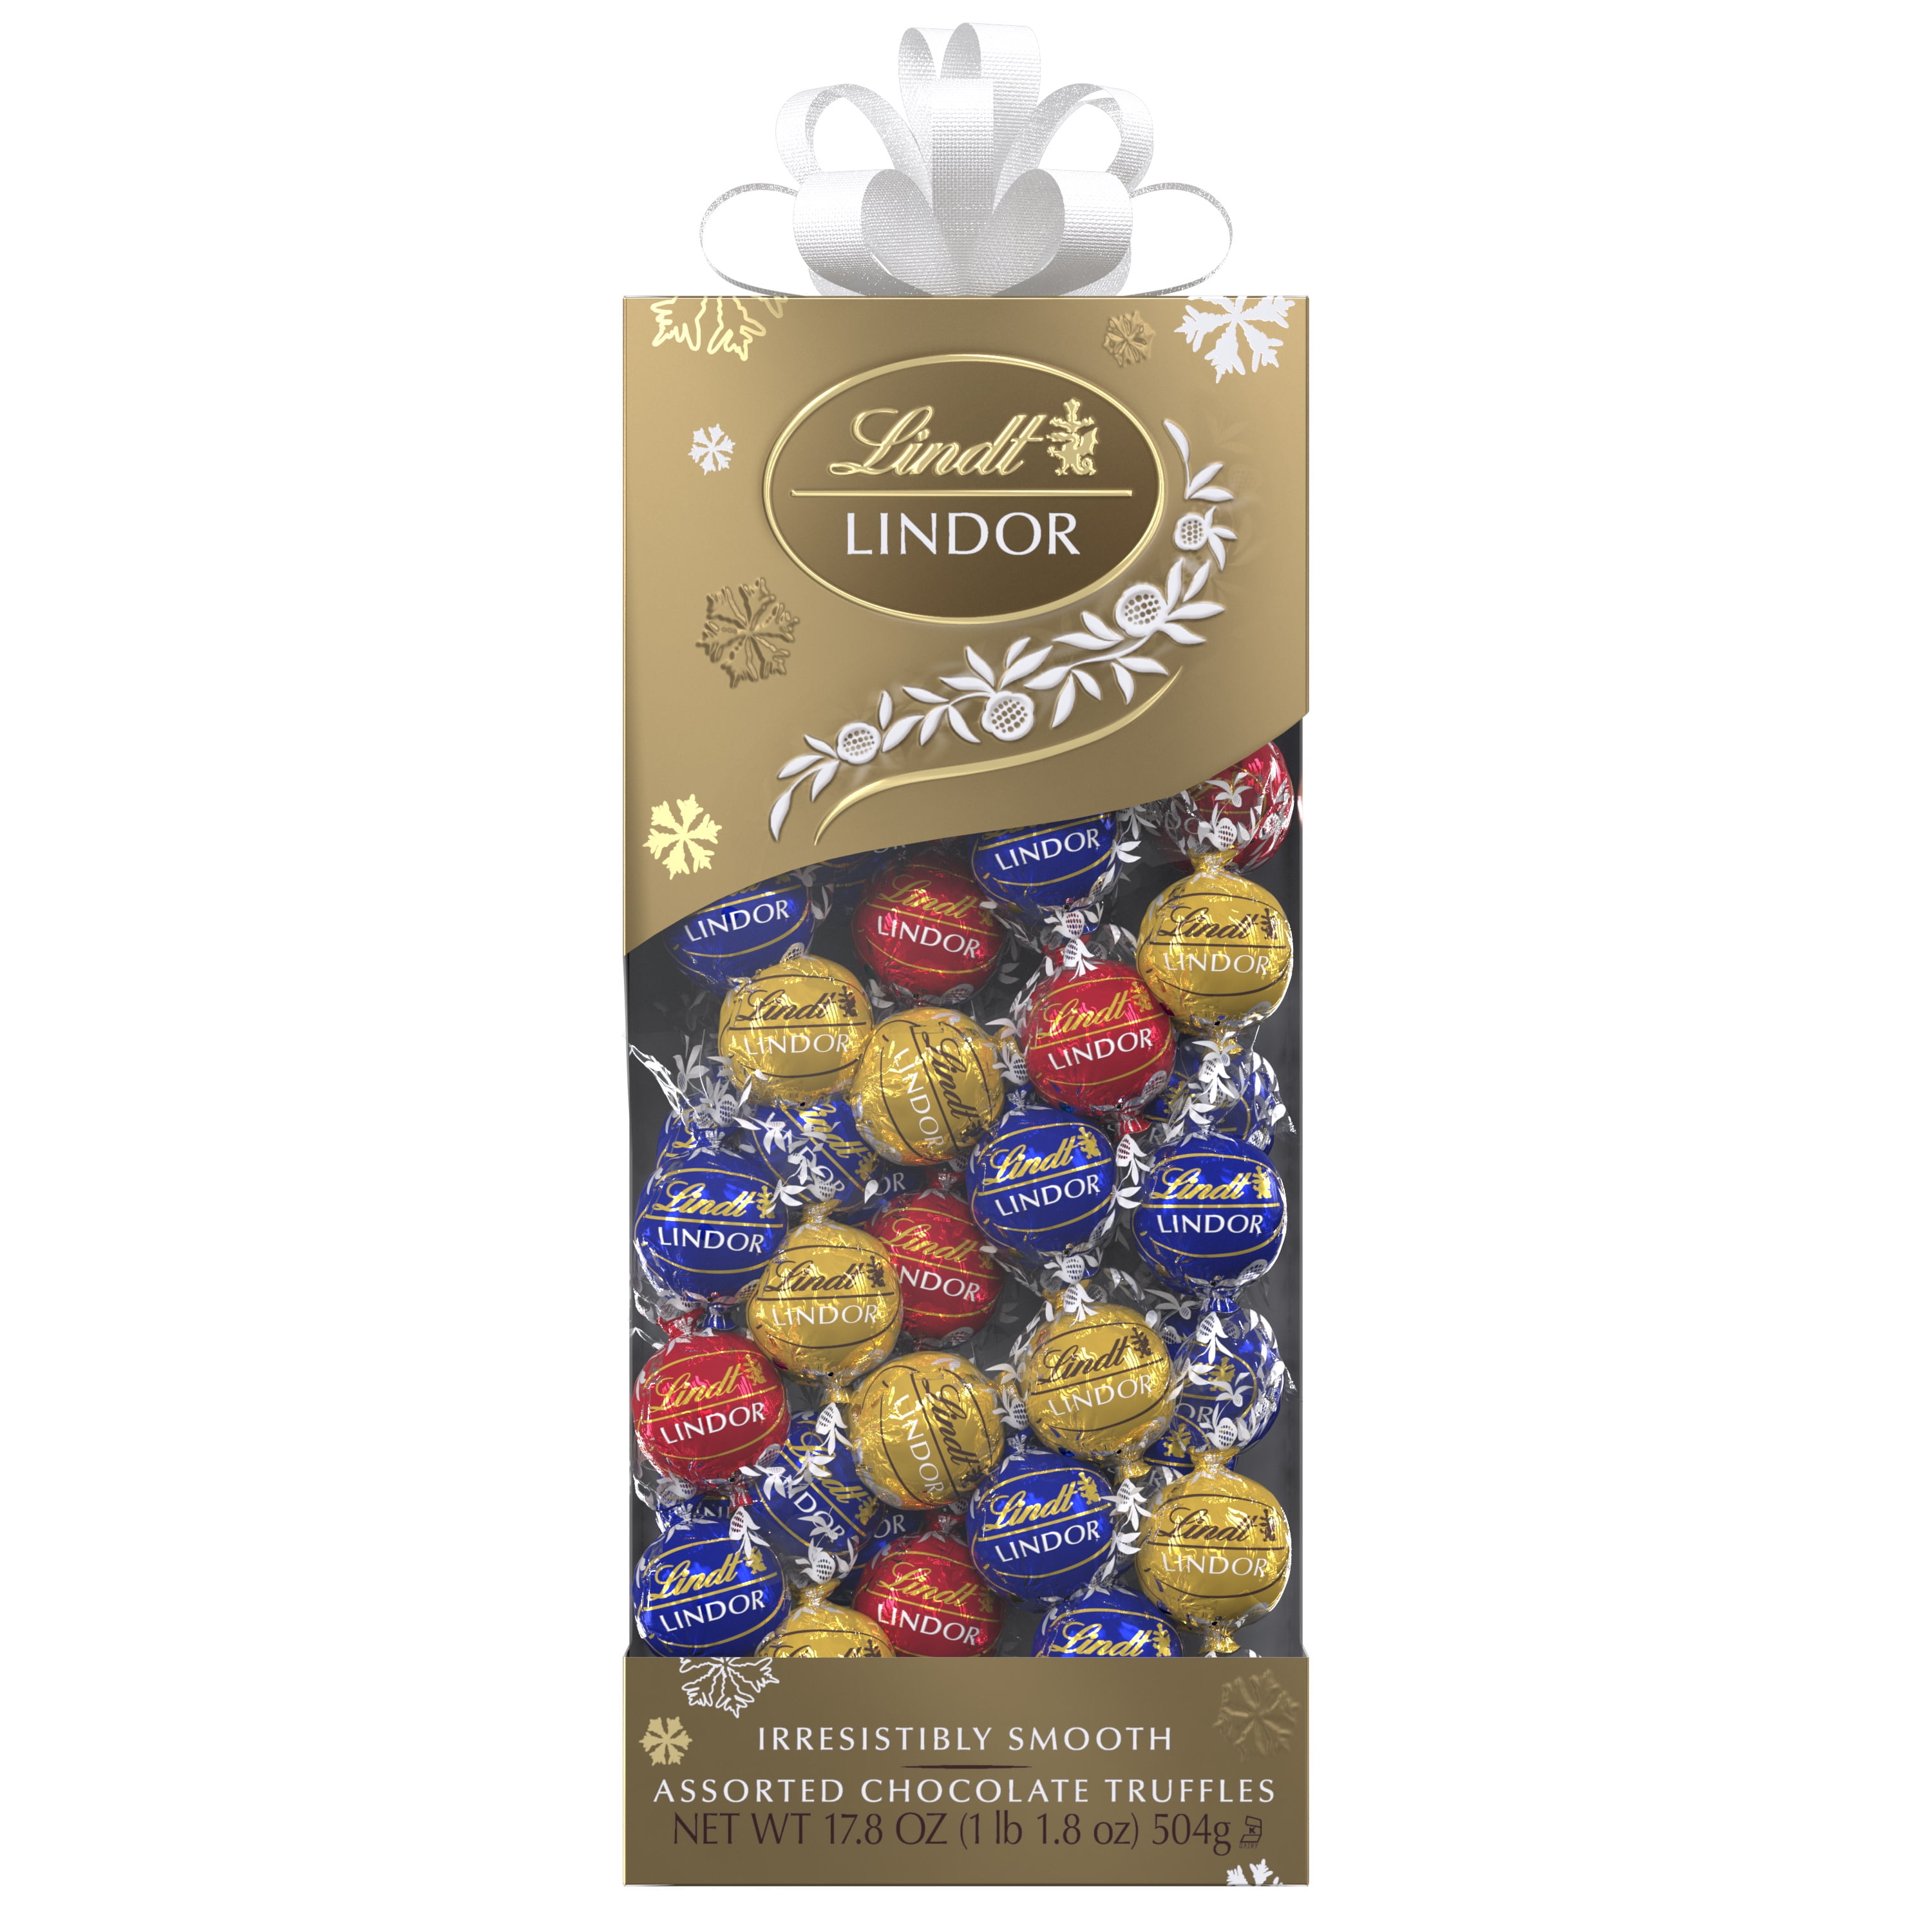 Lindt LINDOR Holiday Assorted Chocolate Candy Truffles Traditions Box, 17.8 oz.